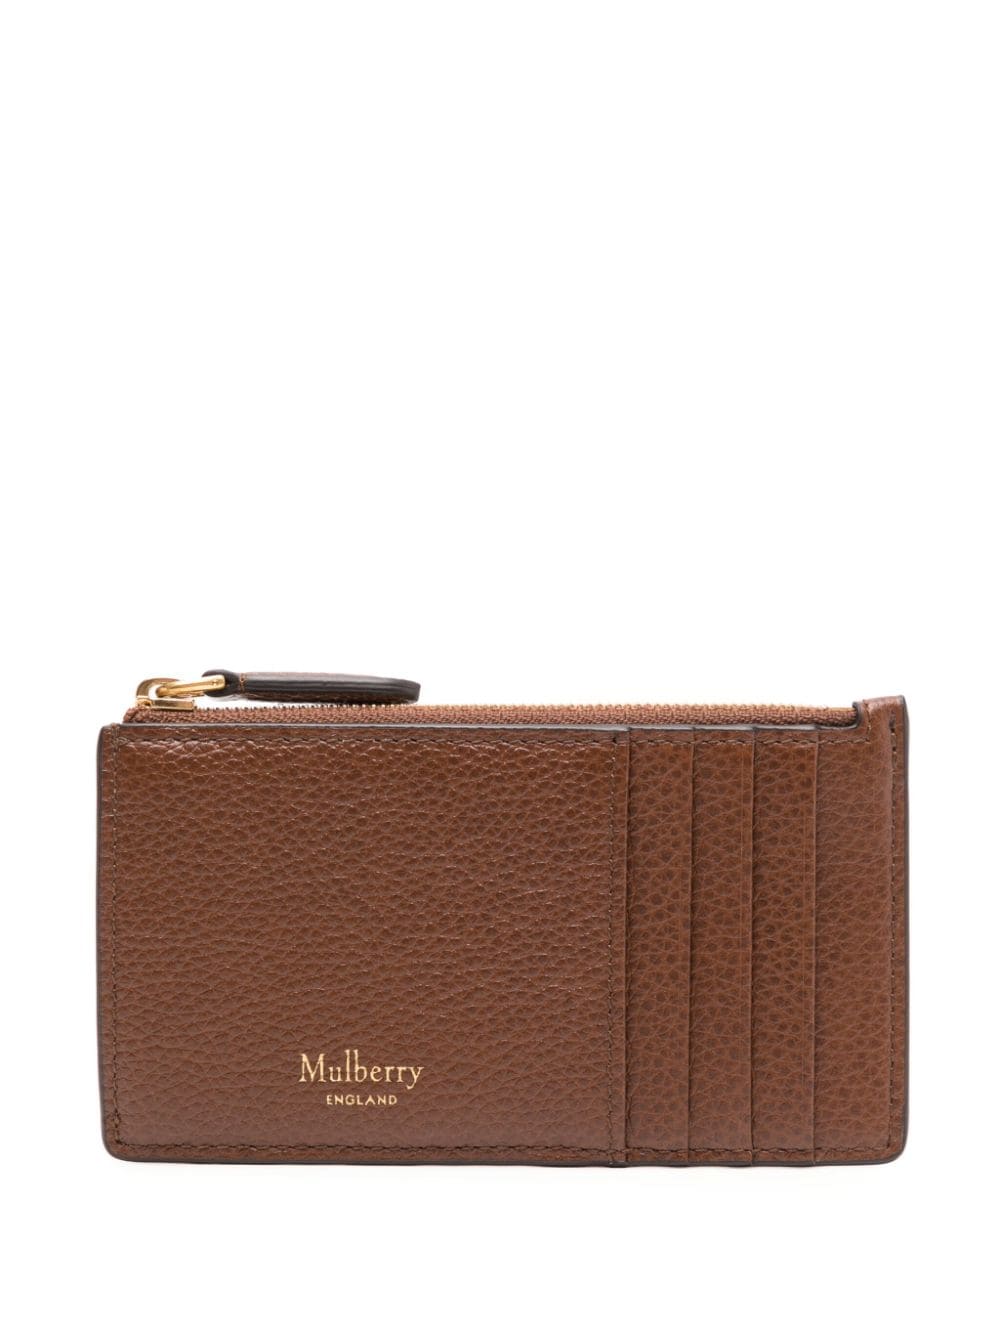 Mulberry zipped leather coin pouch - Brown von Mulberry